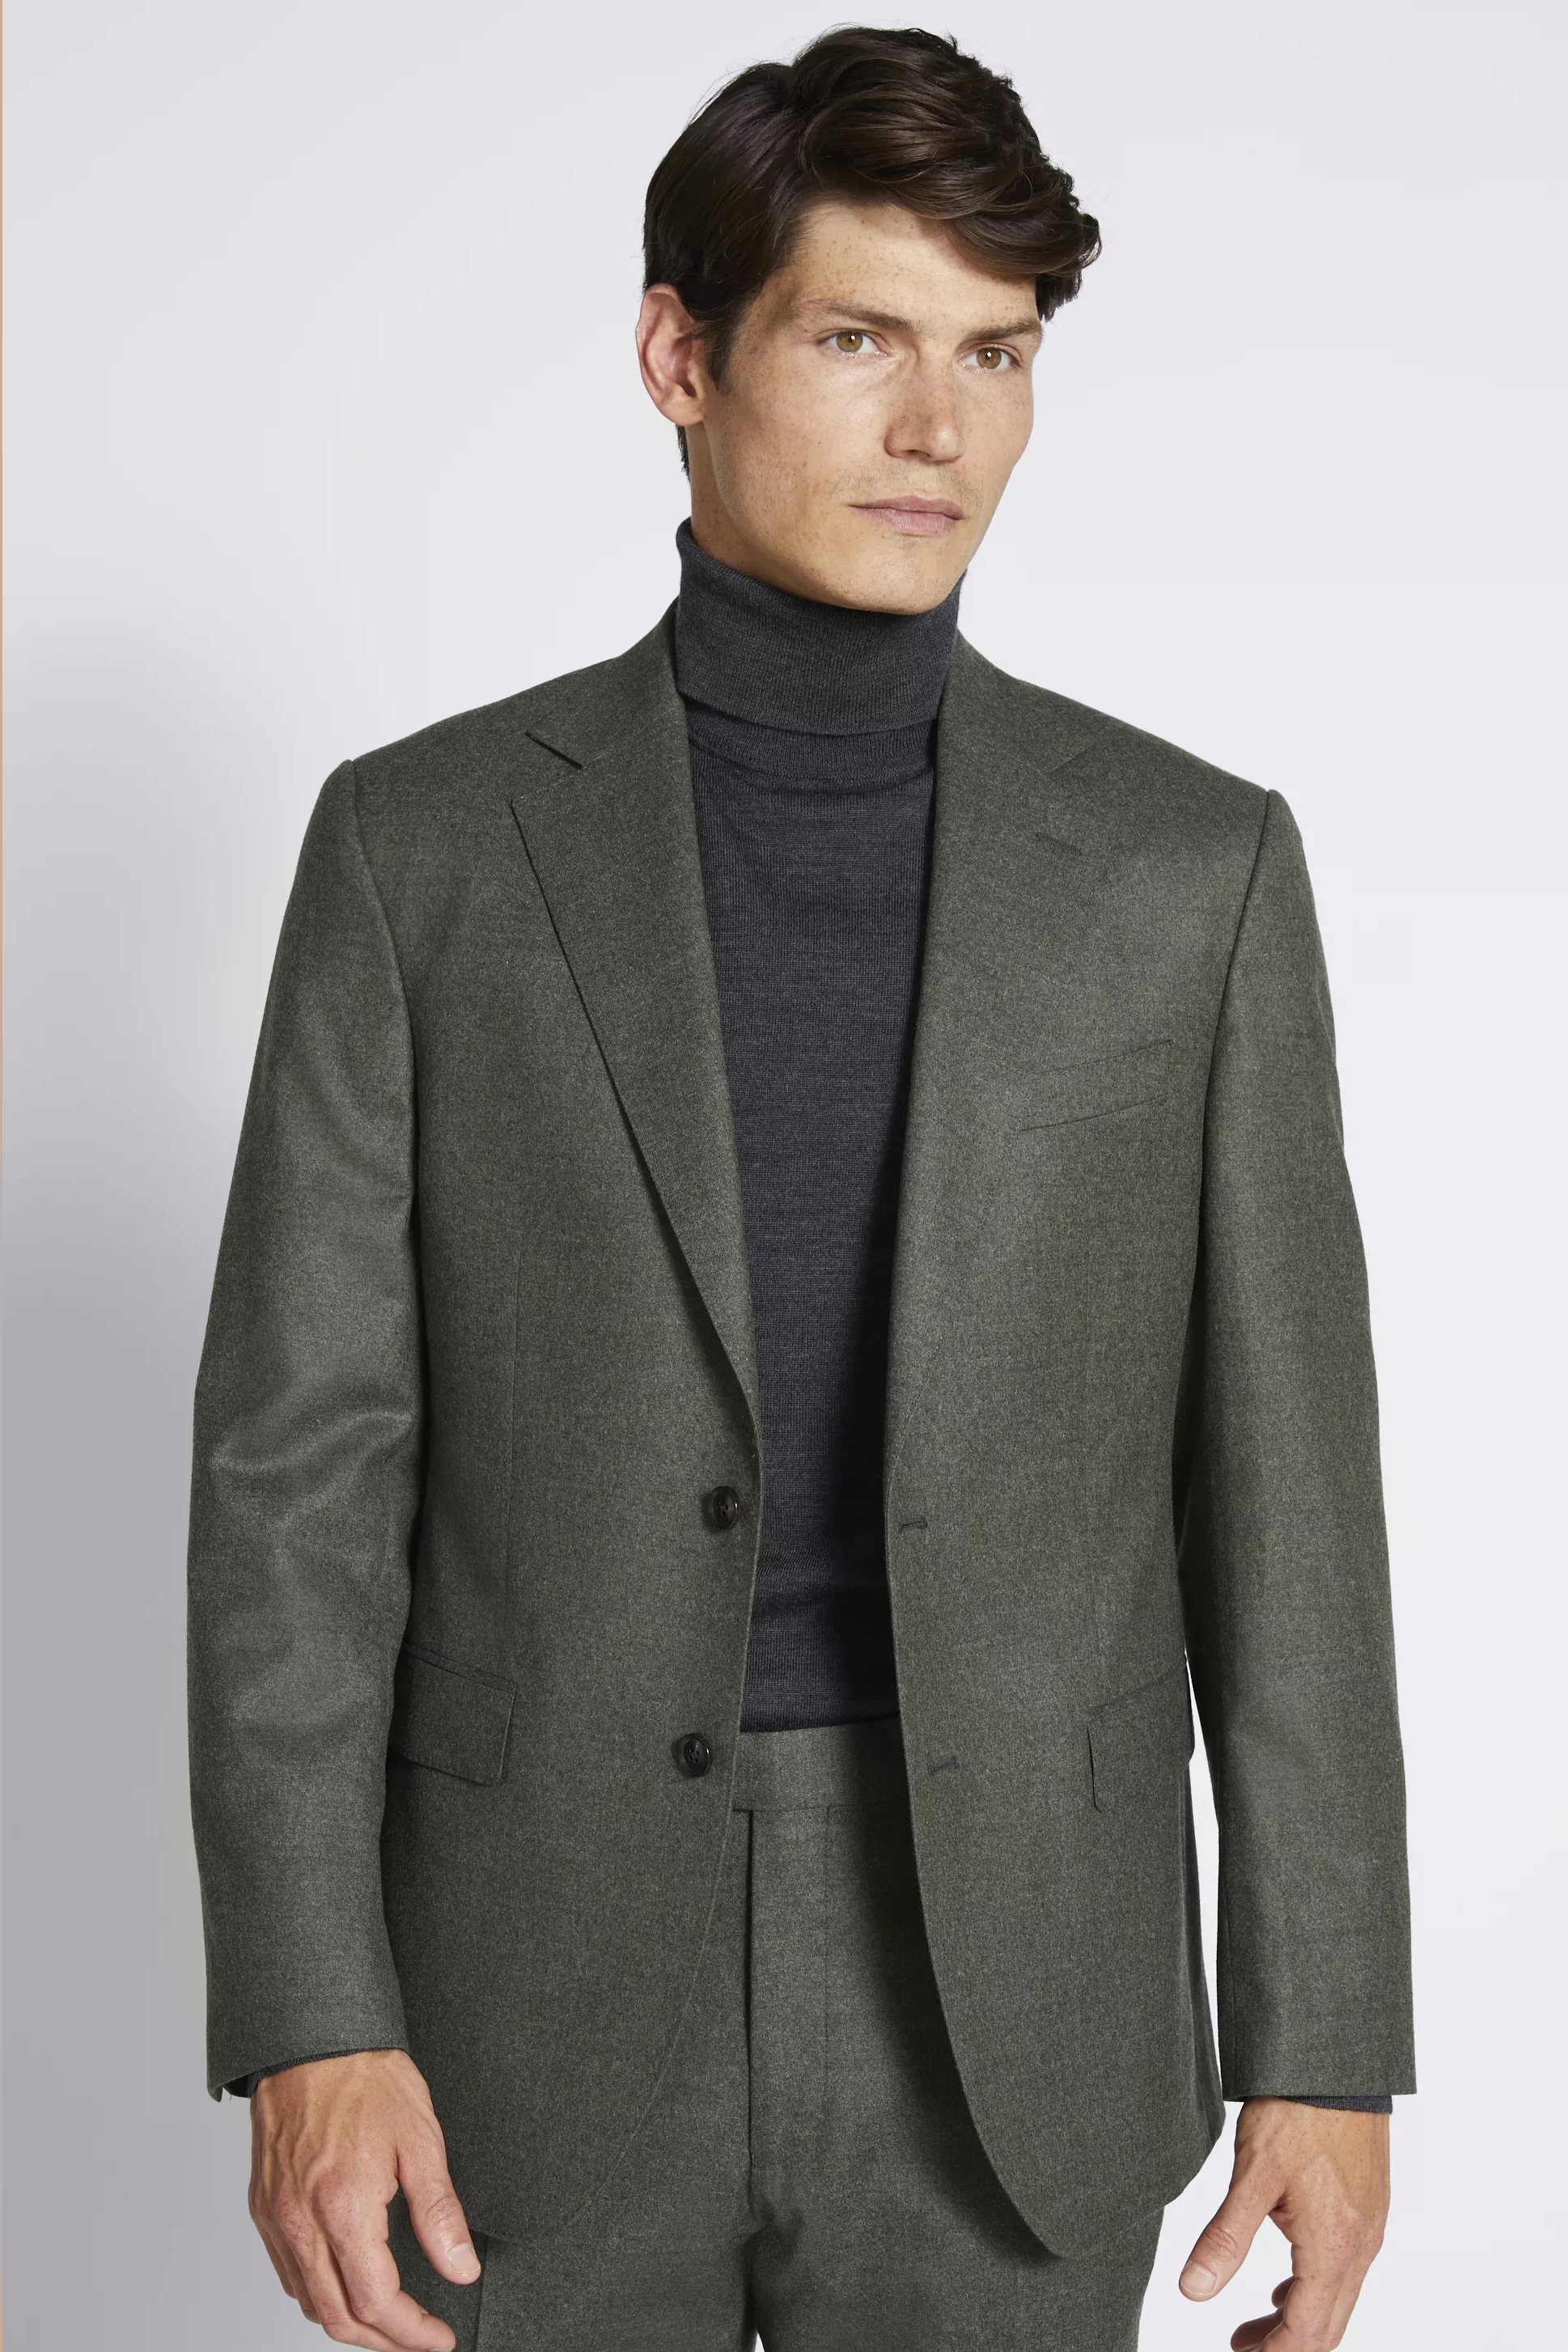 Italian Tailored Fit Green Jacket | Buy Online at Moss